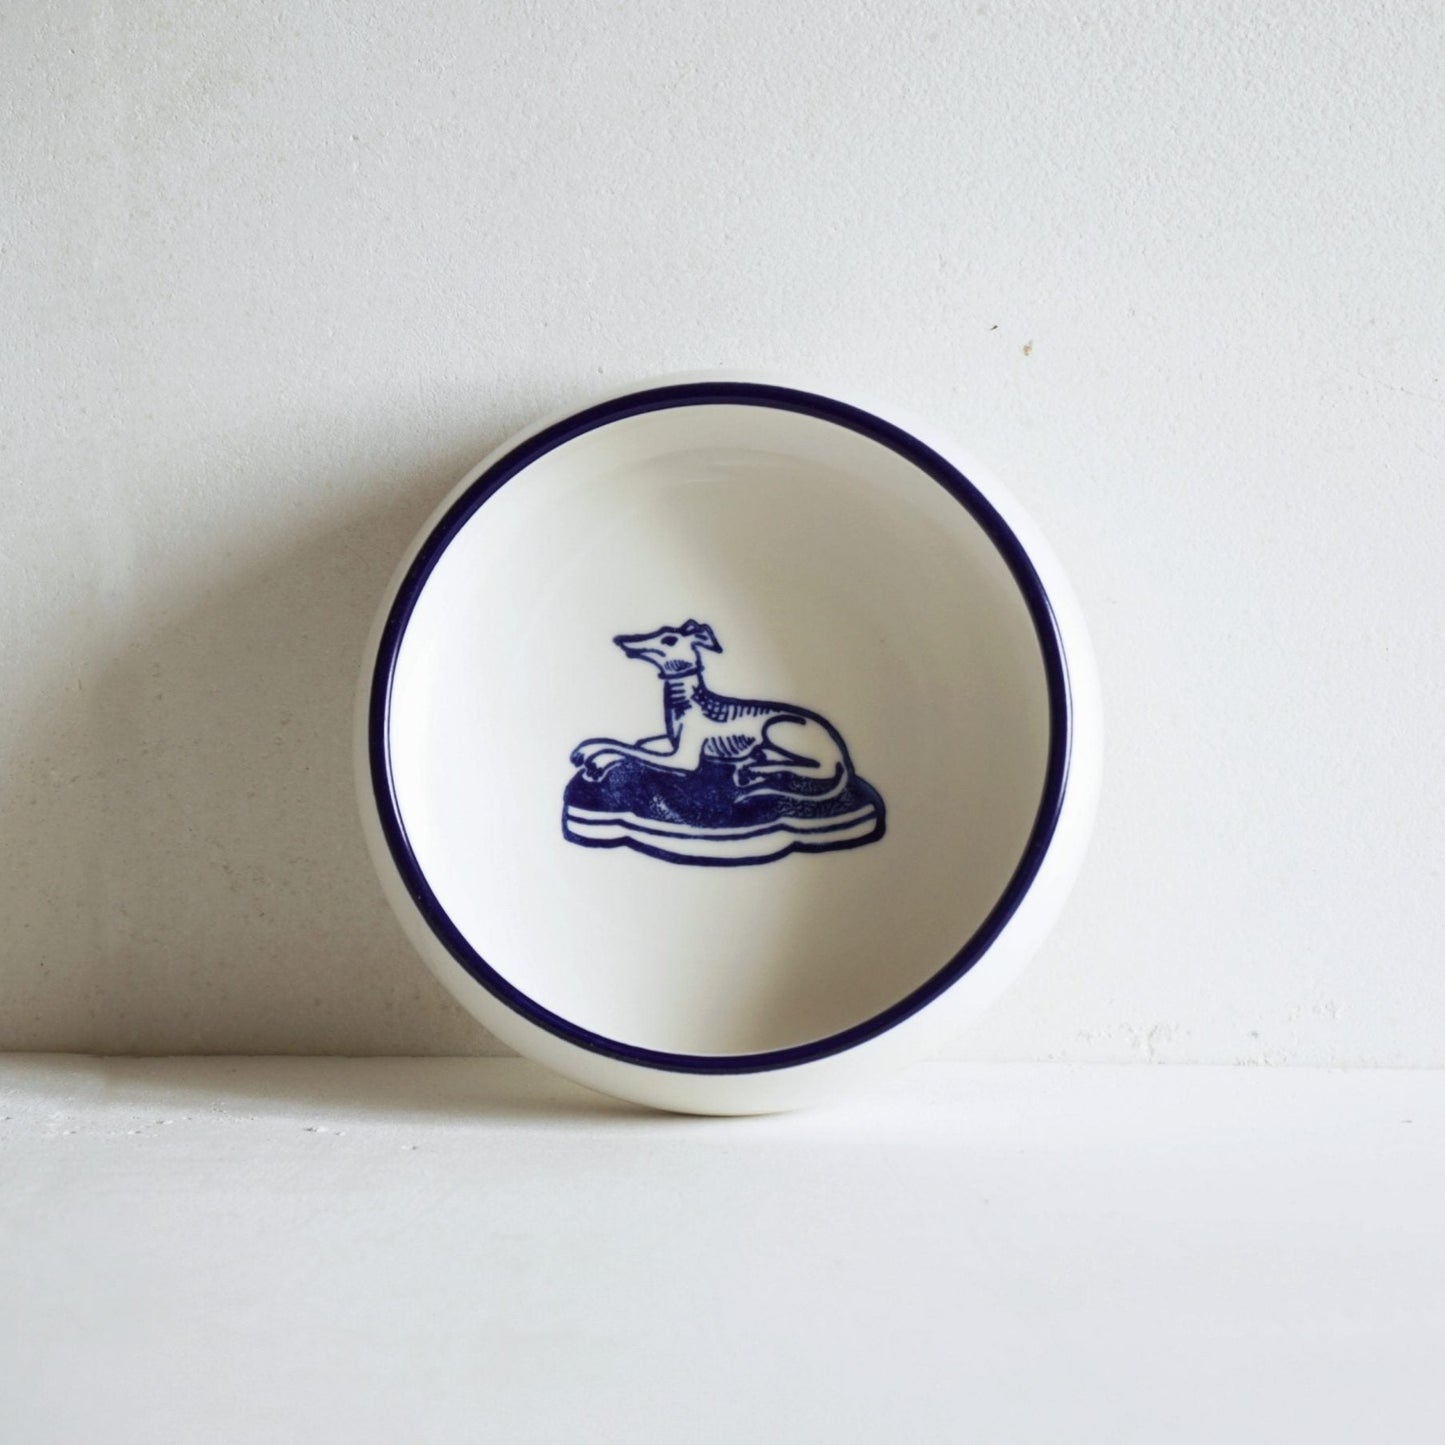 Porcelain flat bowl with a dog